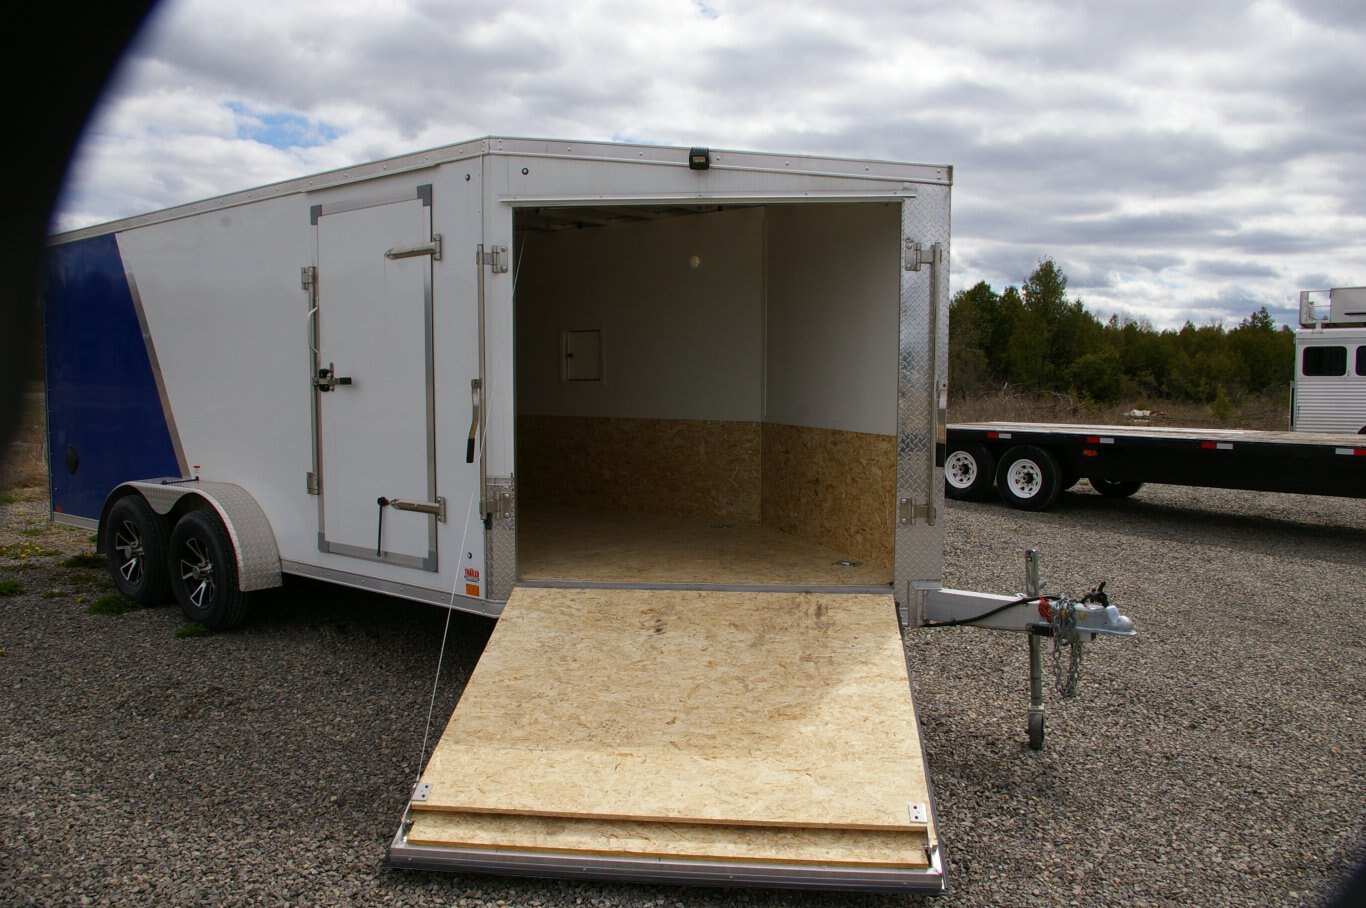 2022 USED 7X21 SNOWMOBILE TRAILER, TANDEM AXLE, 4 Sled Trailer Drive in and Drive Out, WHITE/BLUE, 7000GVWR 